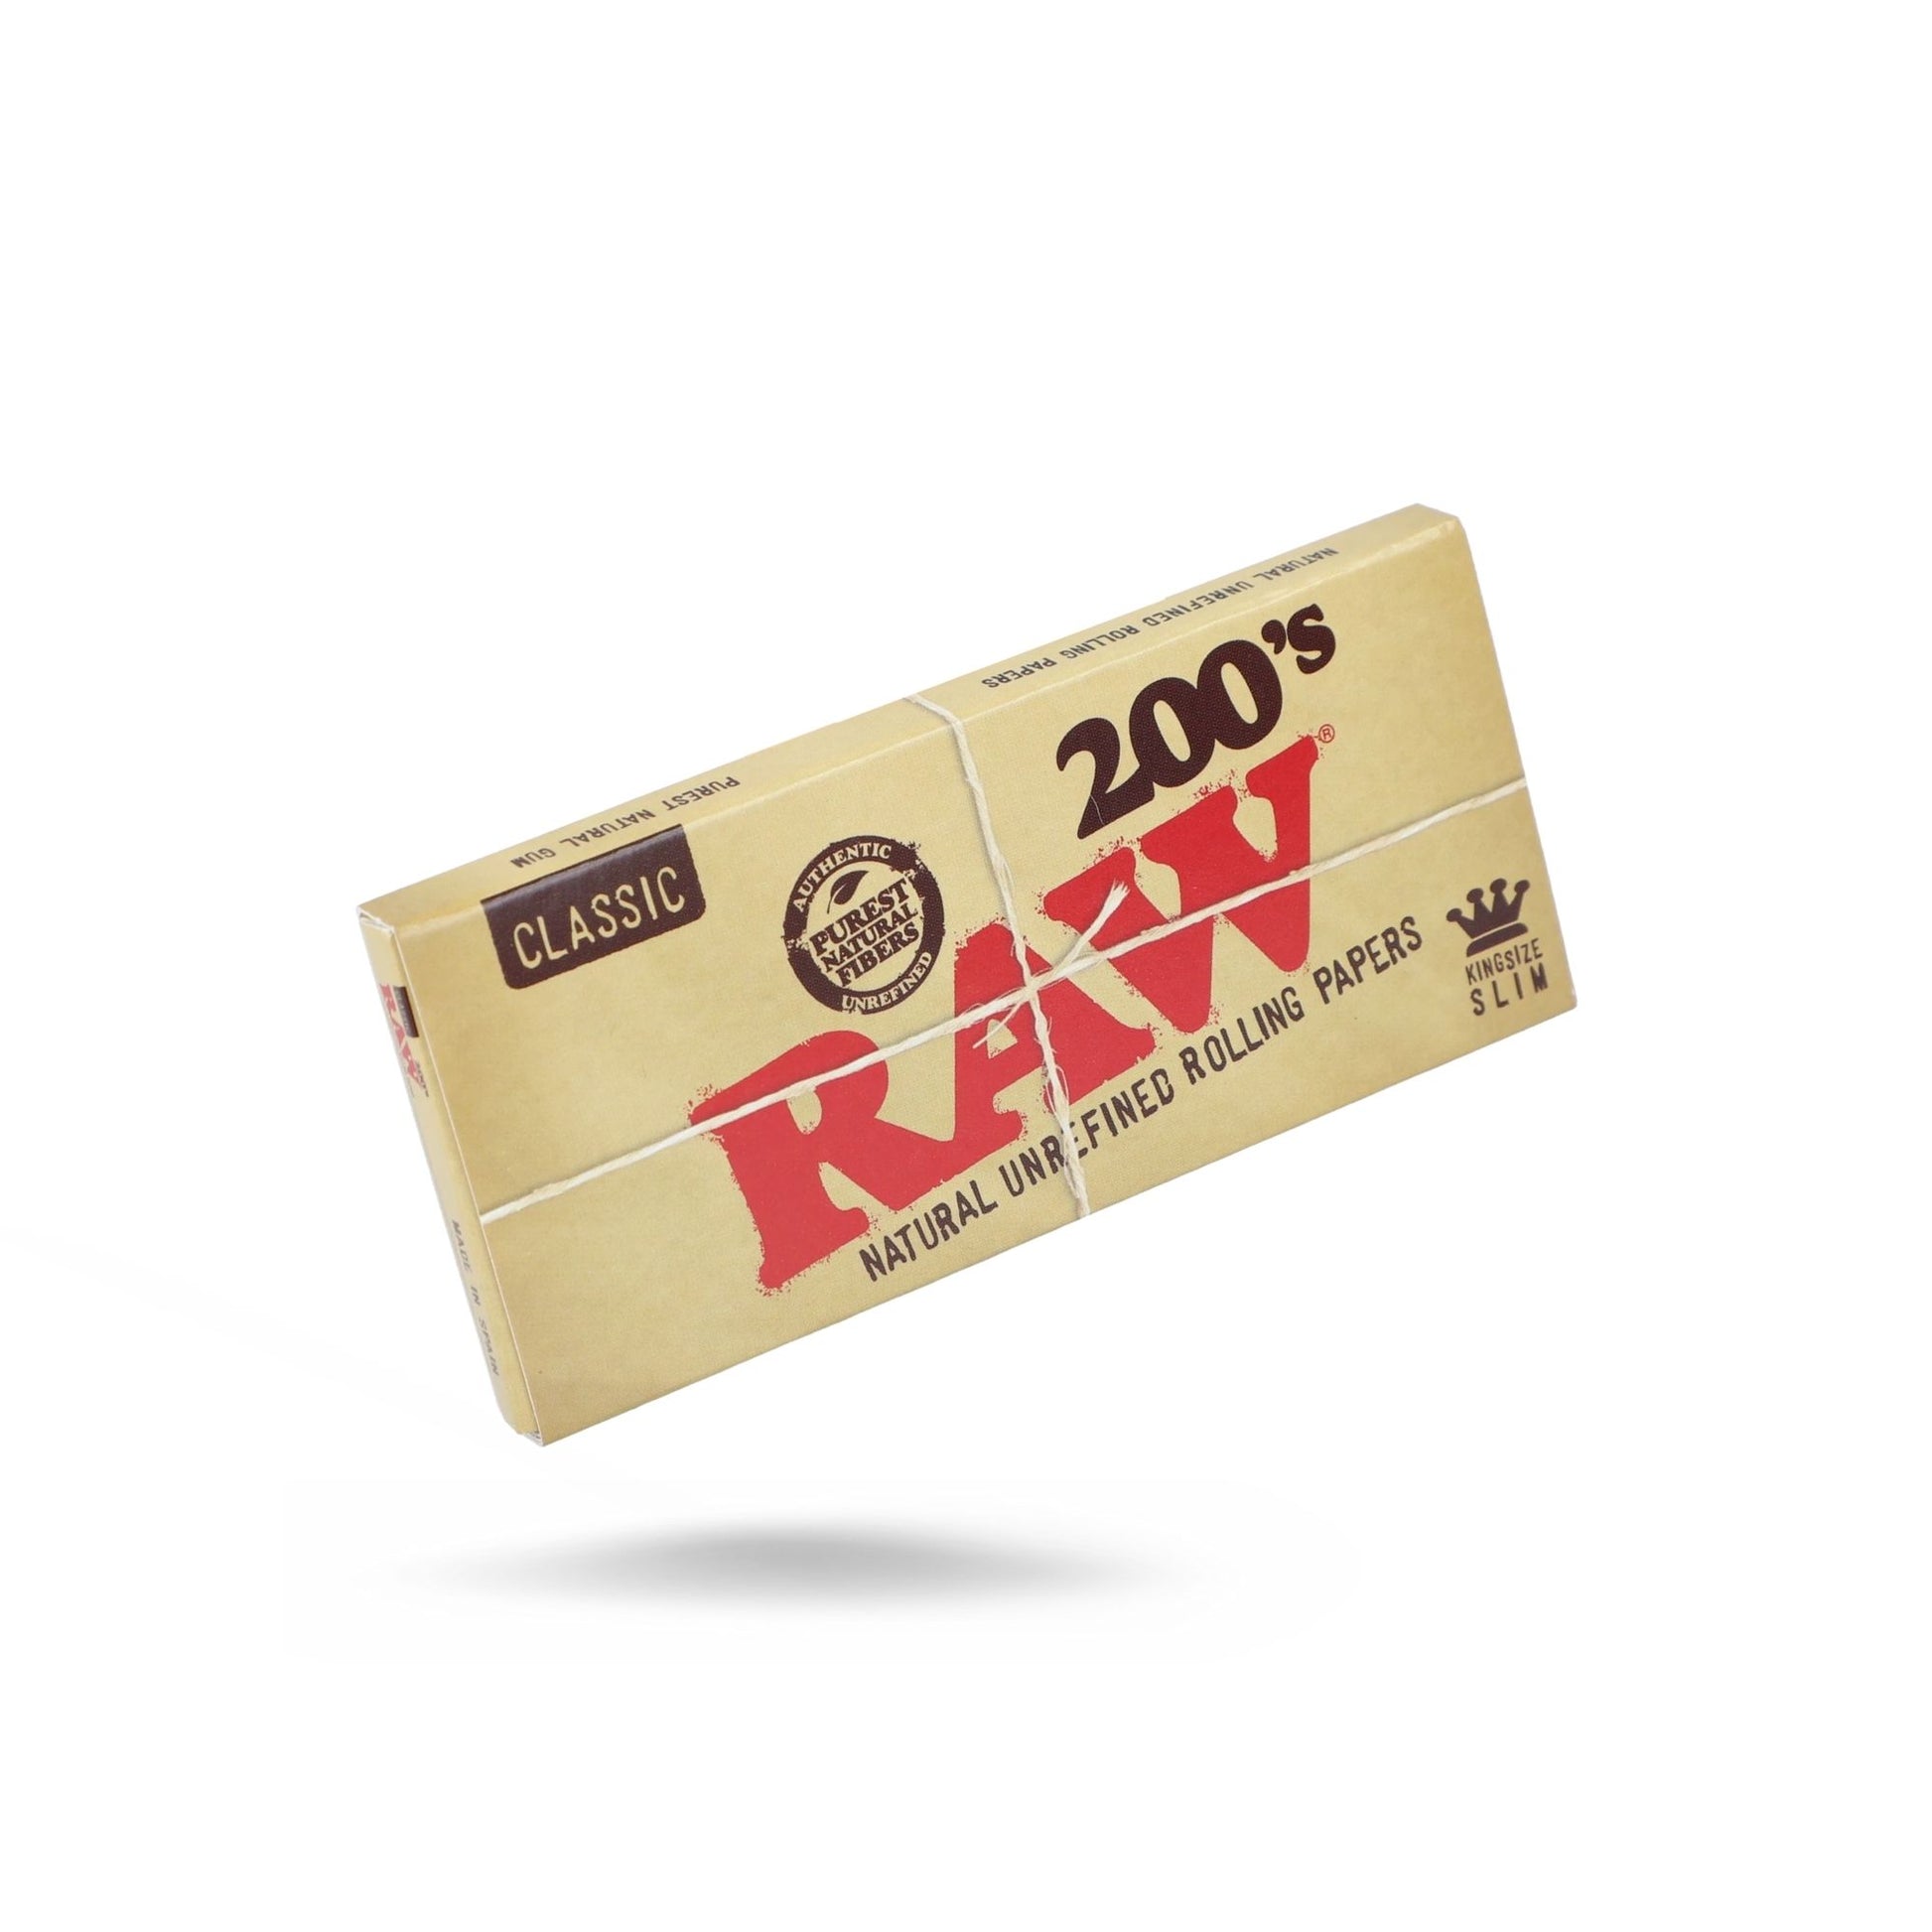 RAW Classic King Size Creaseless Rolling Paper 200 leaves HighJack India